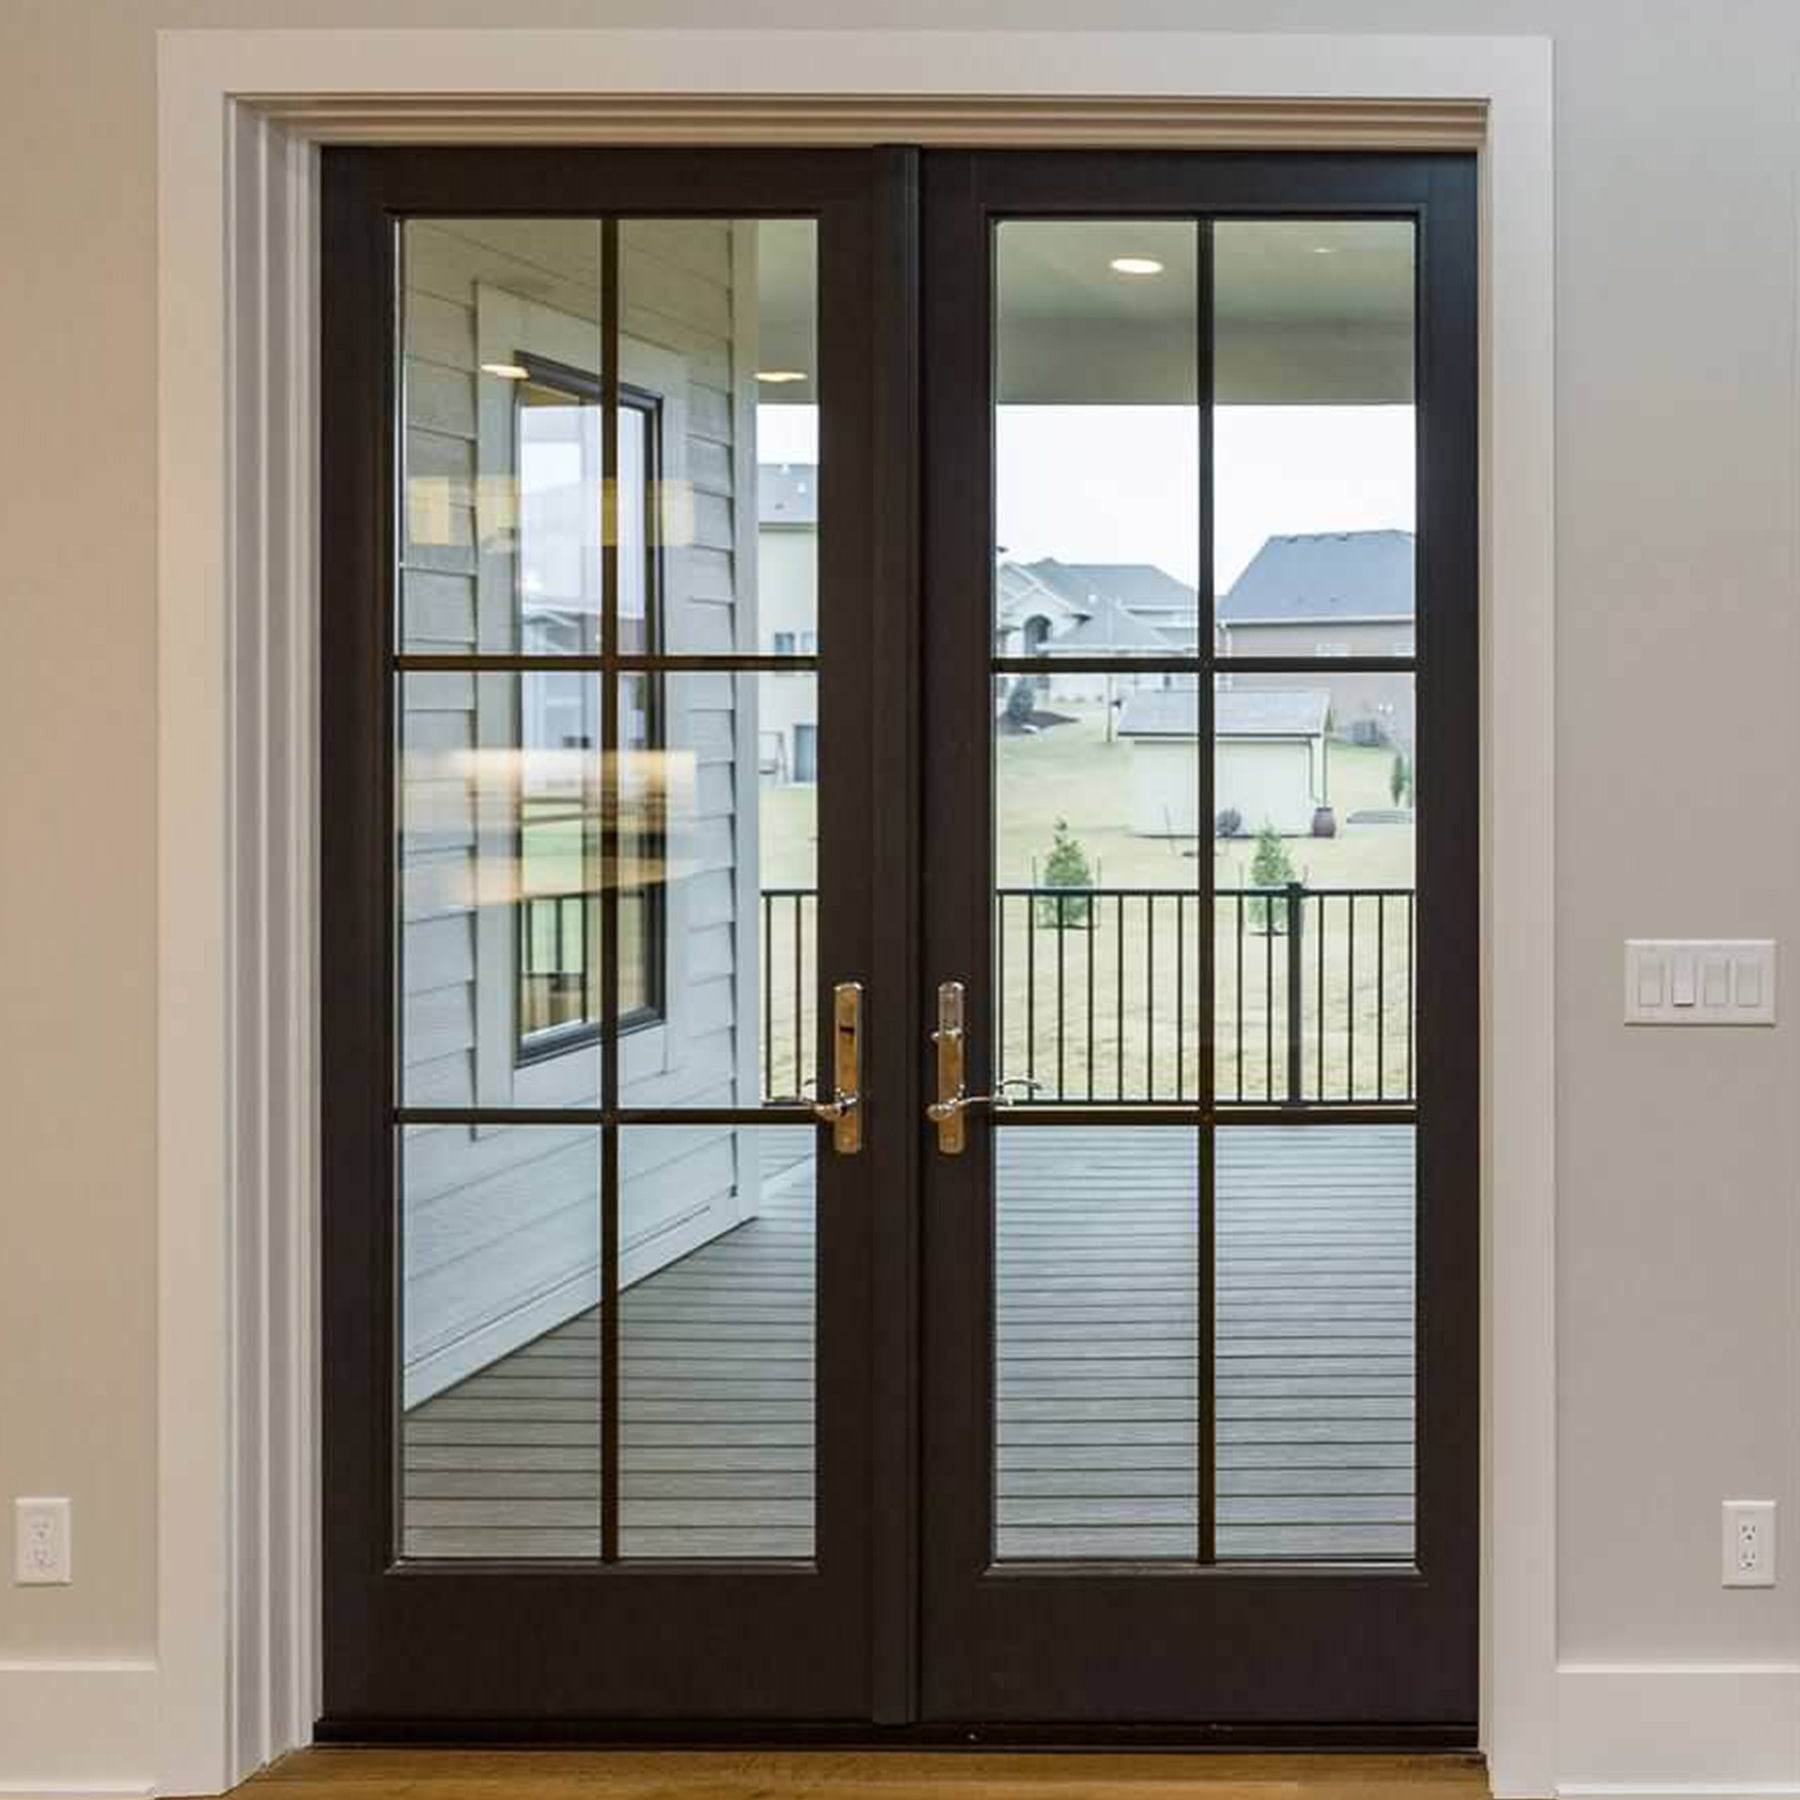 gloryirondoors double entry french exterior doors with matte black finish